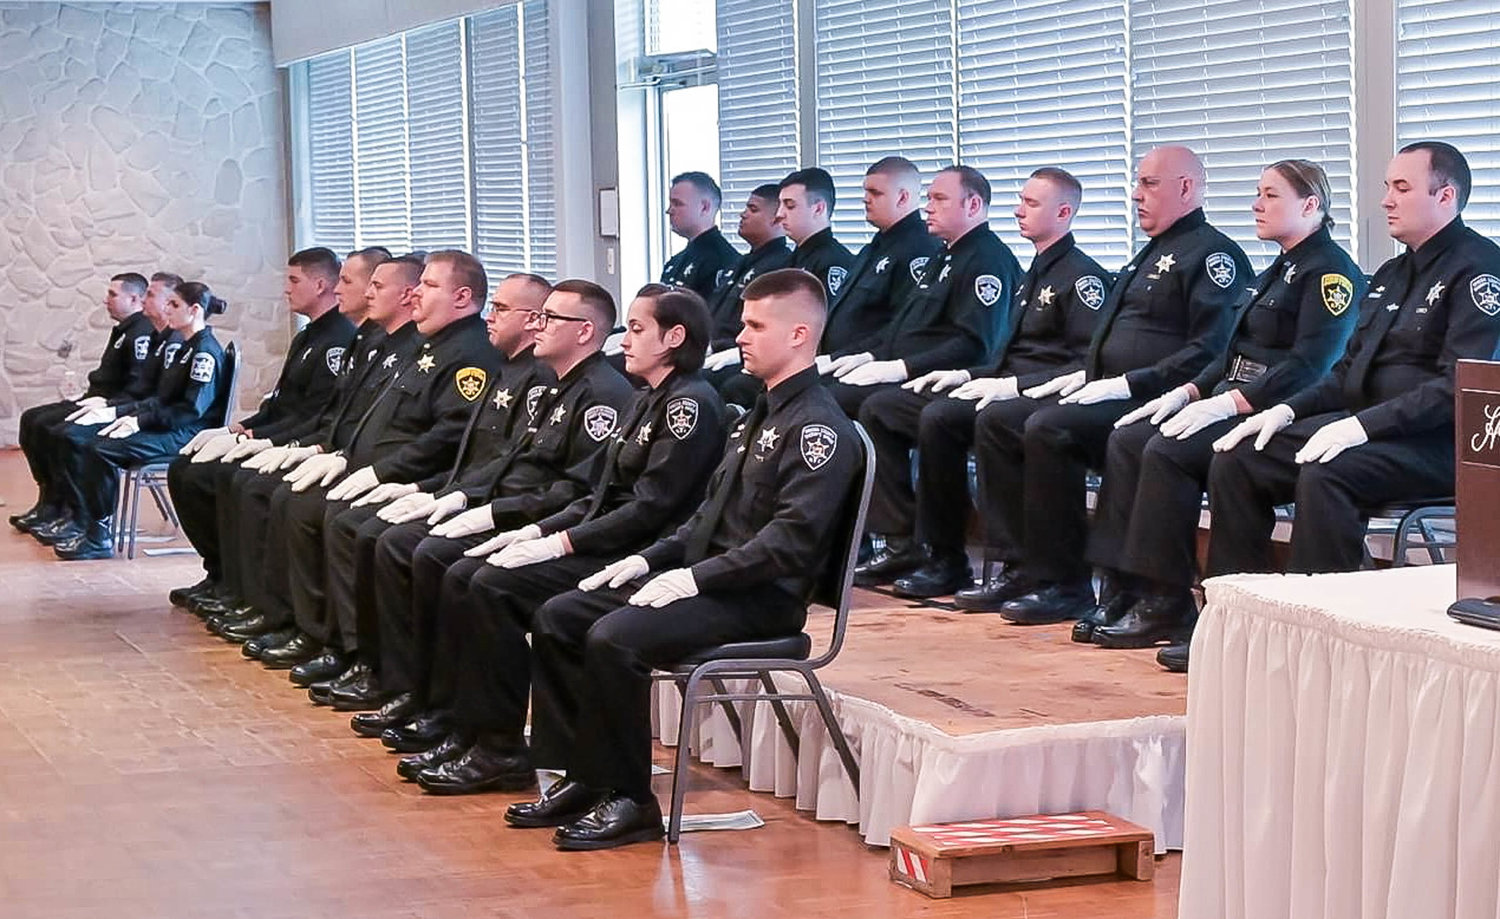 Seventeen men and women graduated from the Basic Corrections Academy on Friday, with a ceremony held at Hart’s Hill Inn in Whitesboro. They will serve in the county jails in Oneida, Herkimer, Madison and Oswego counties. An additional eight officers gradated from the rigorous Emergency Response Team training for the Oneida County Jail.